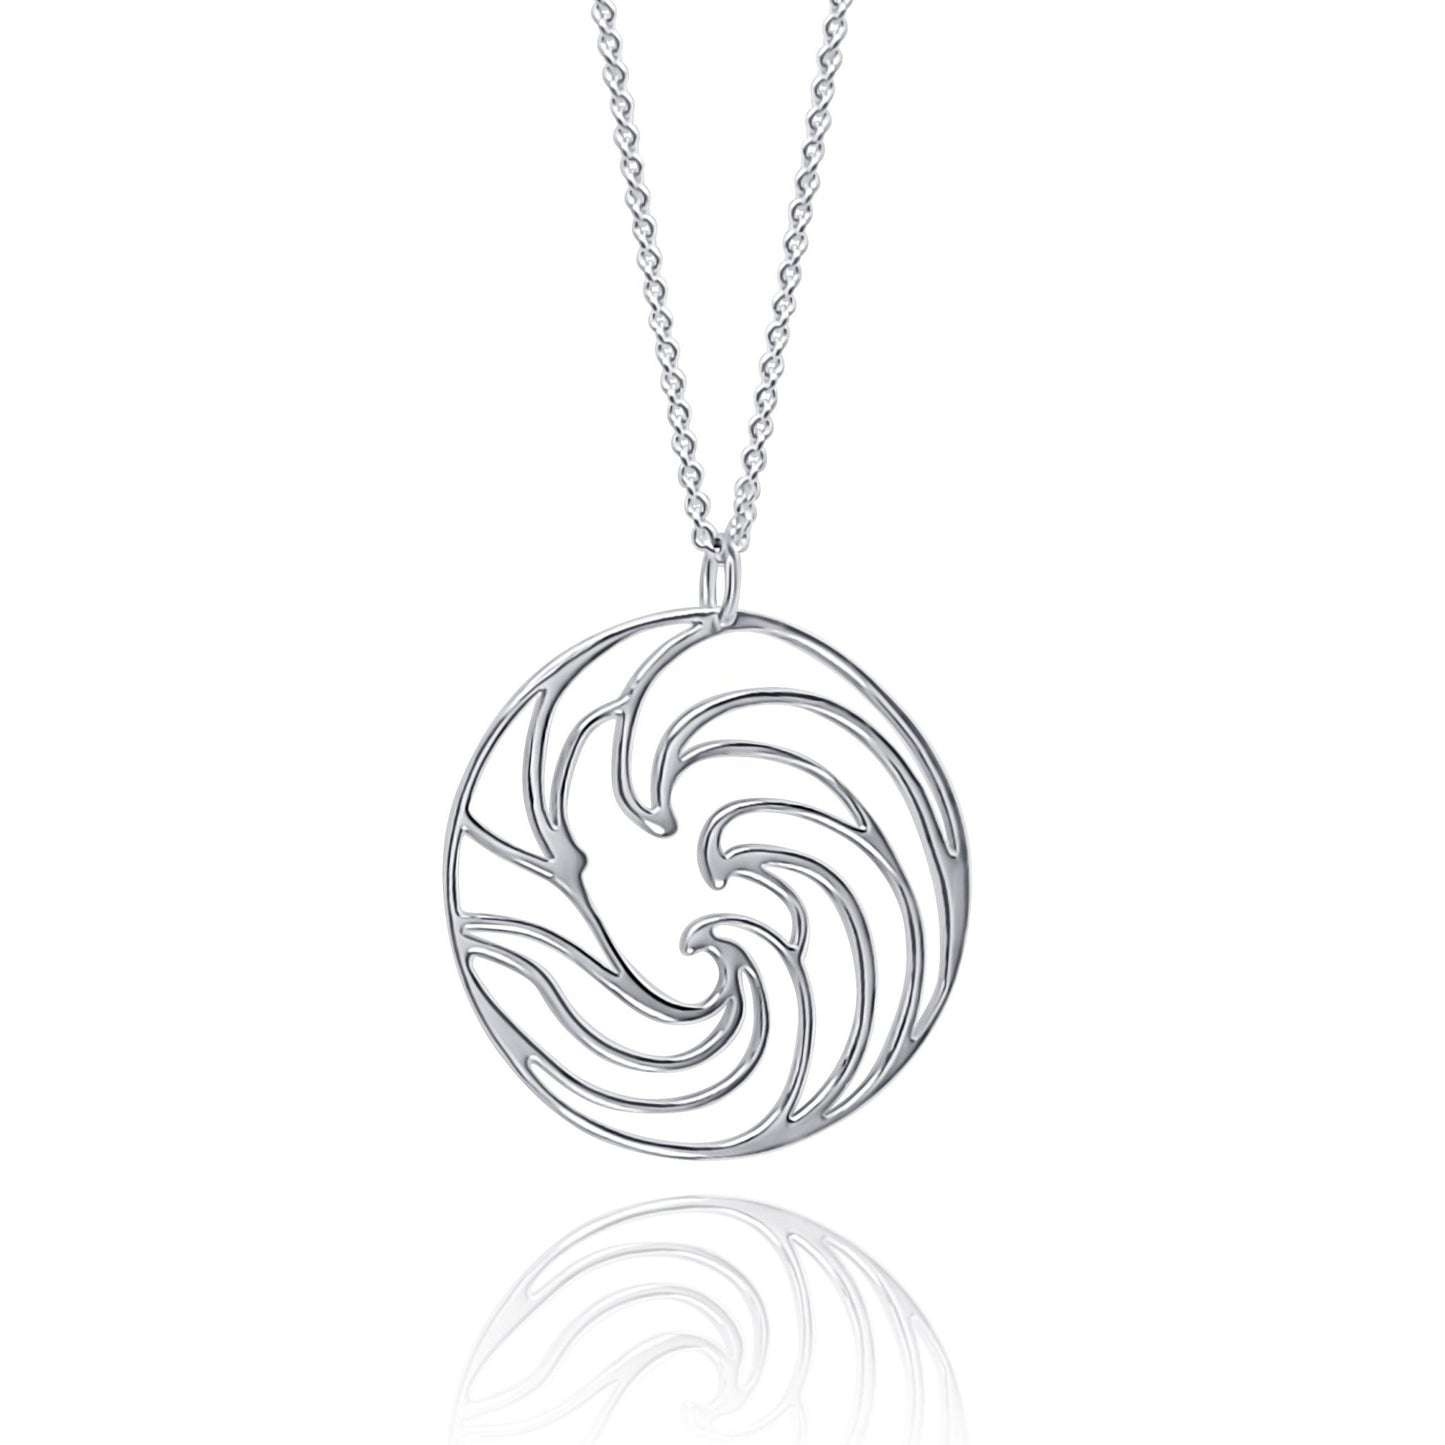 close up of Ocean Circle Silver Pendant Necklace on silver necklace chain